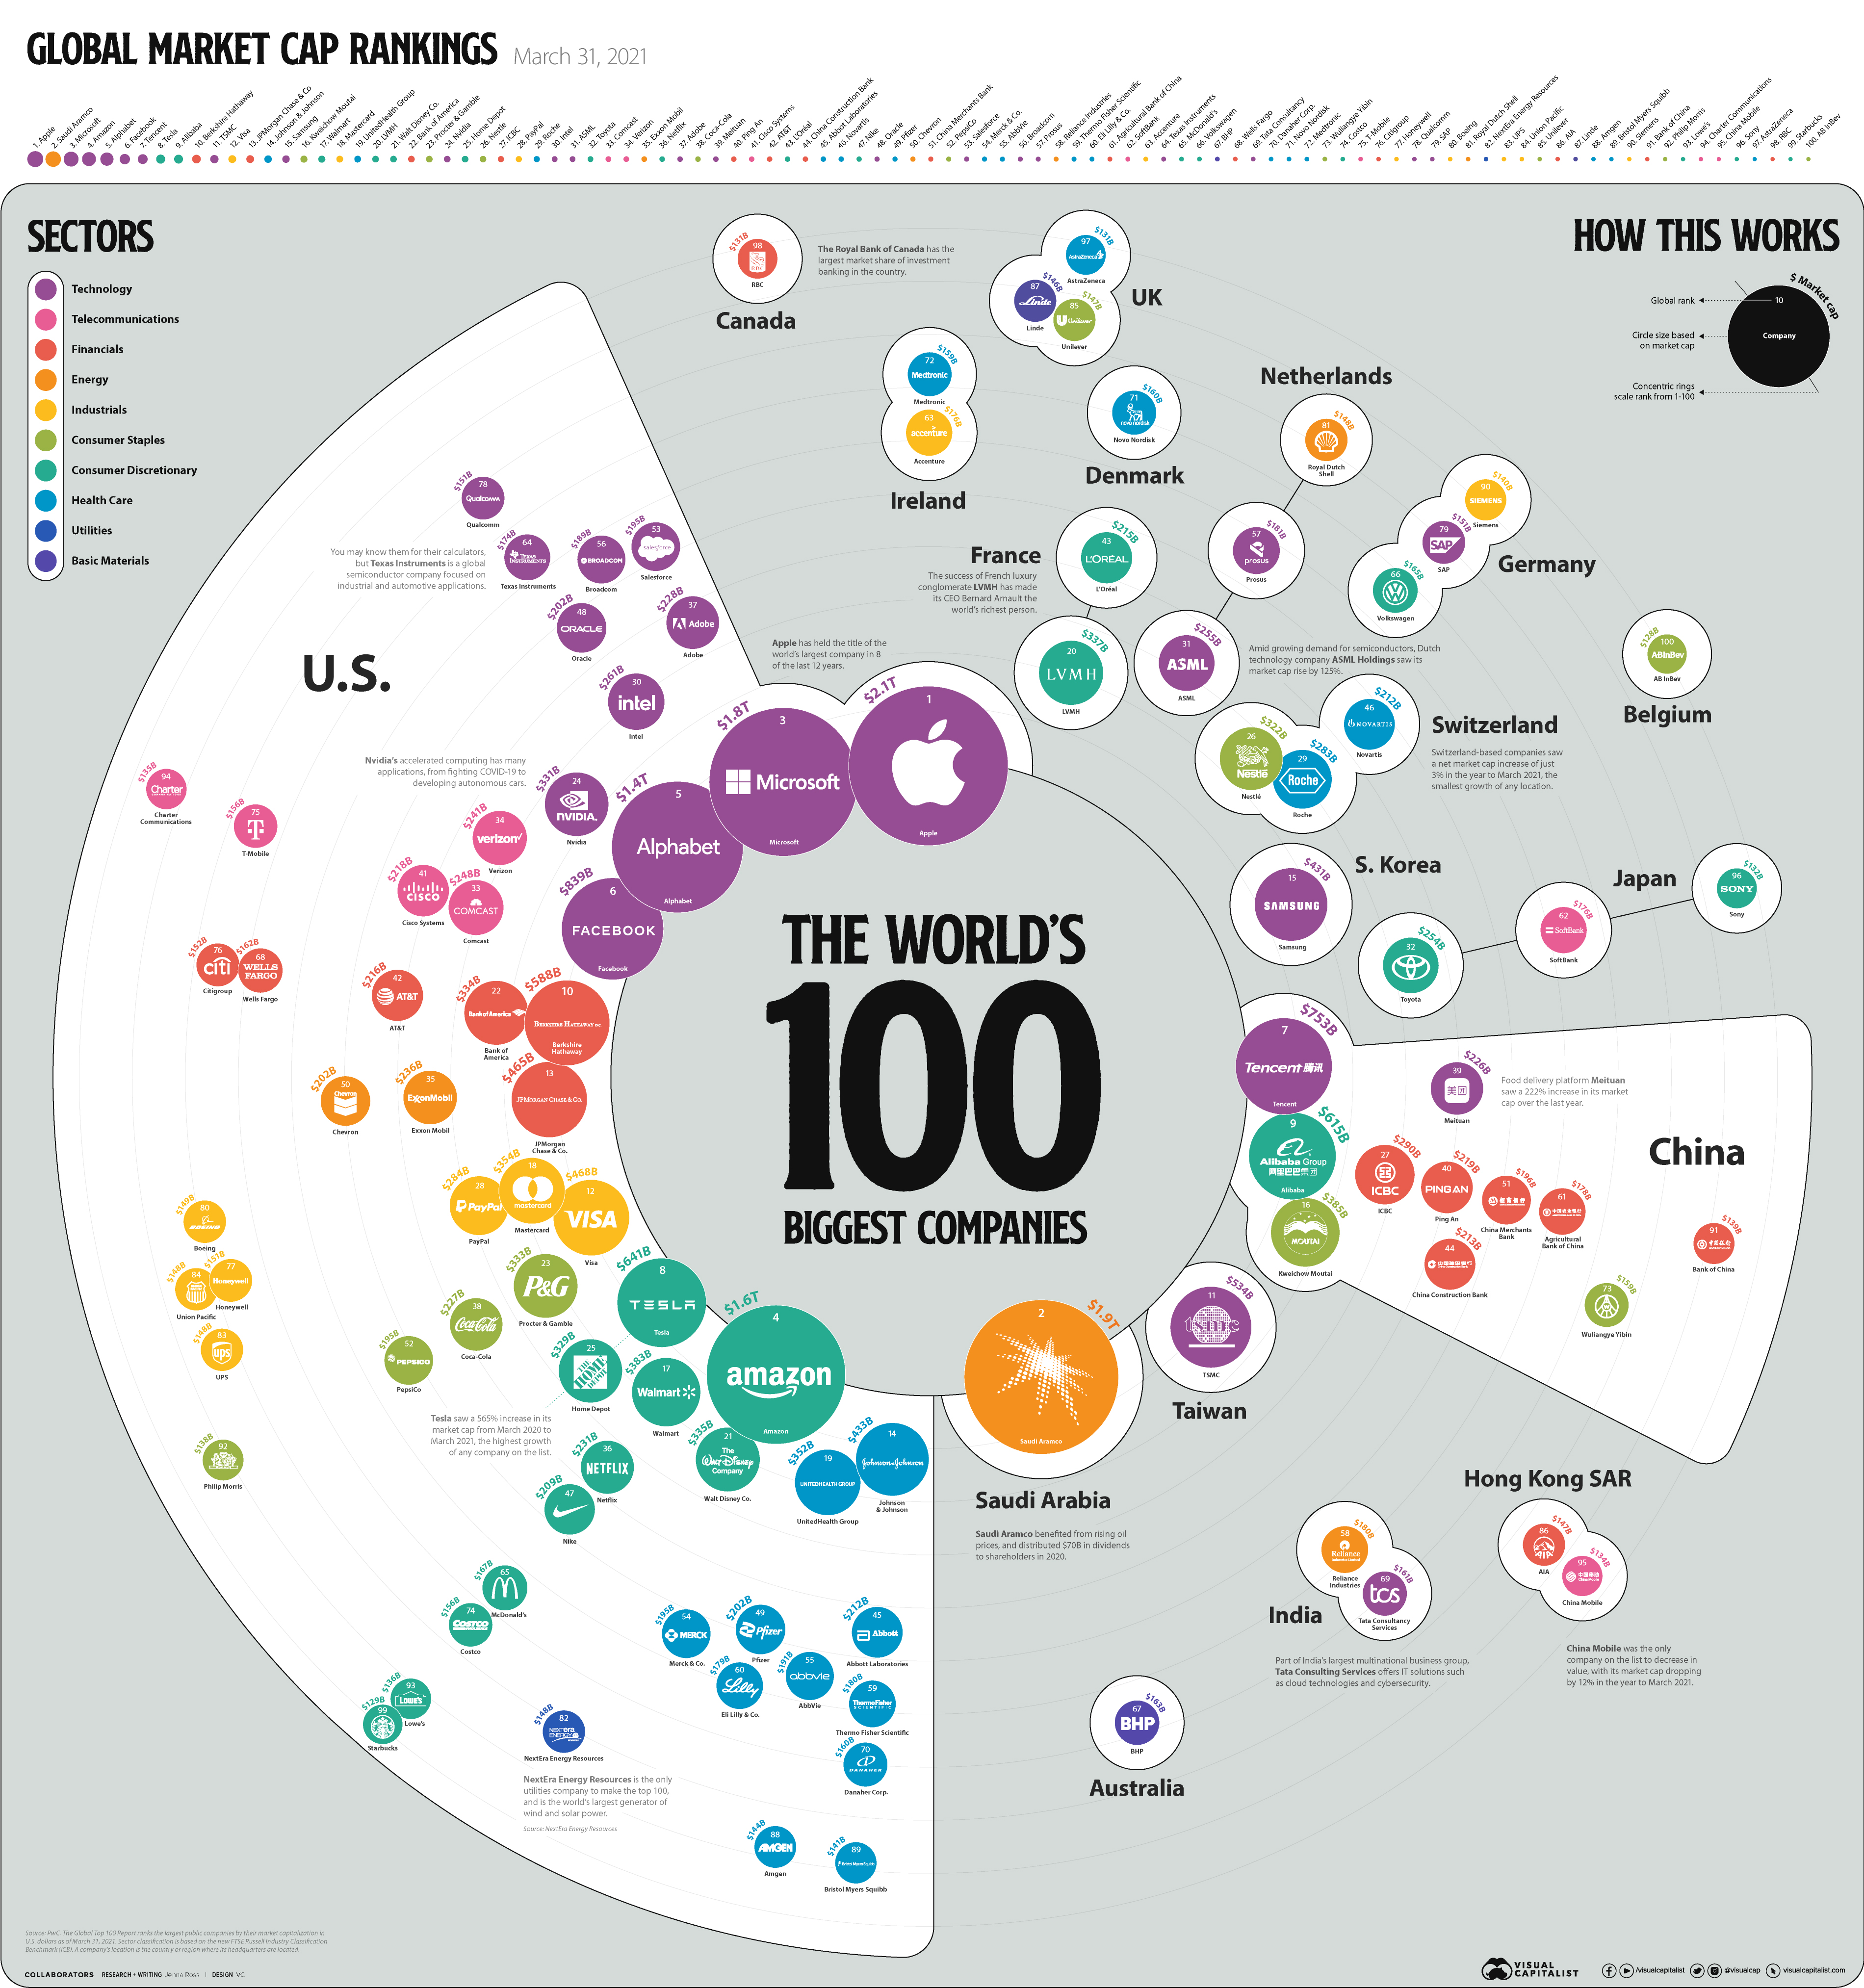 The 100 biggest companies in the world in 2021 sized according to market capitalization